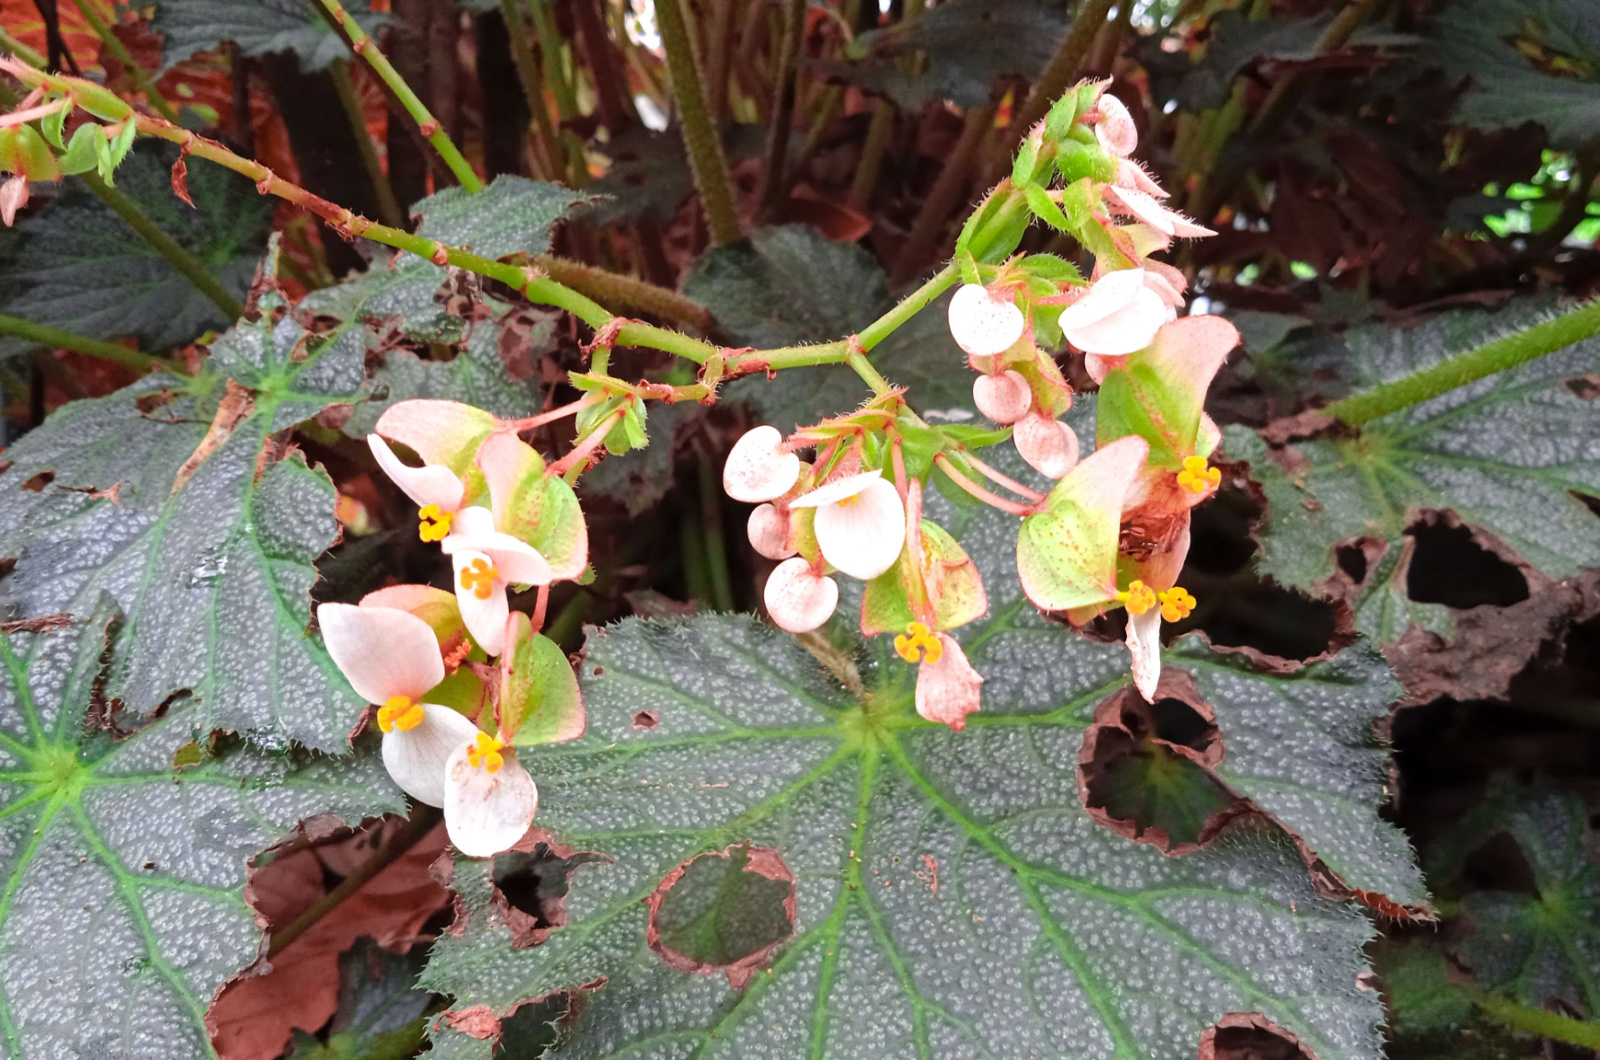 begonia flower attacked by pests